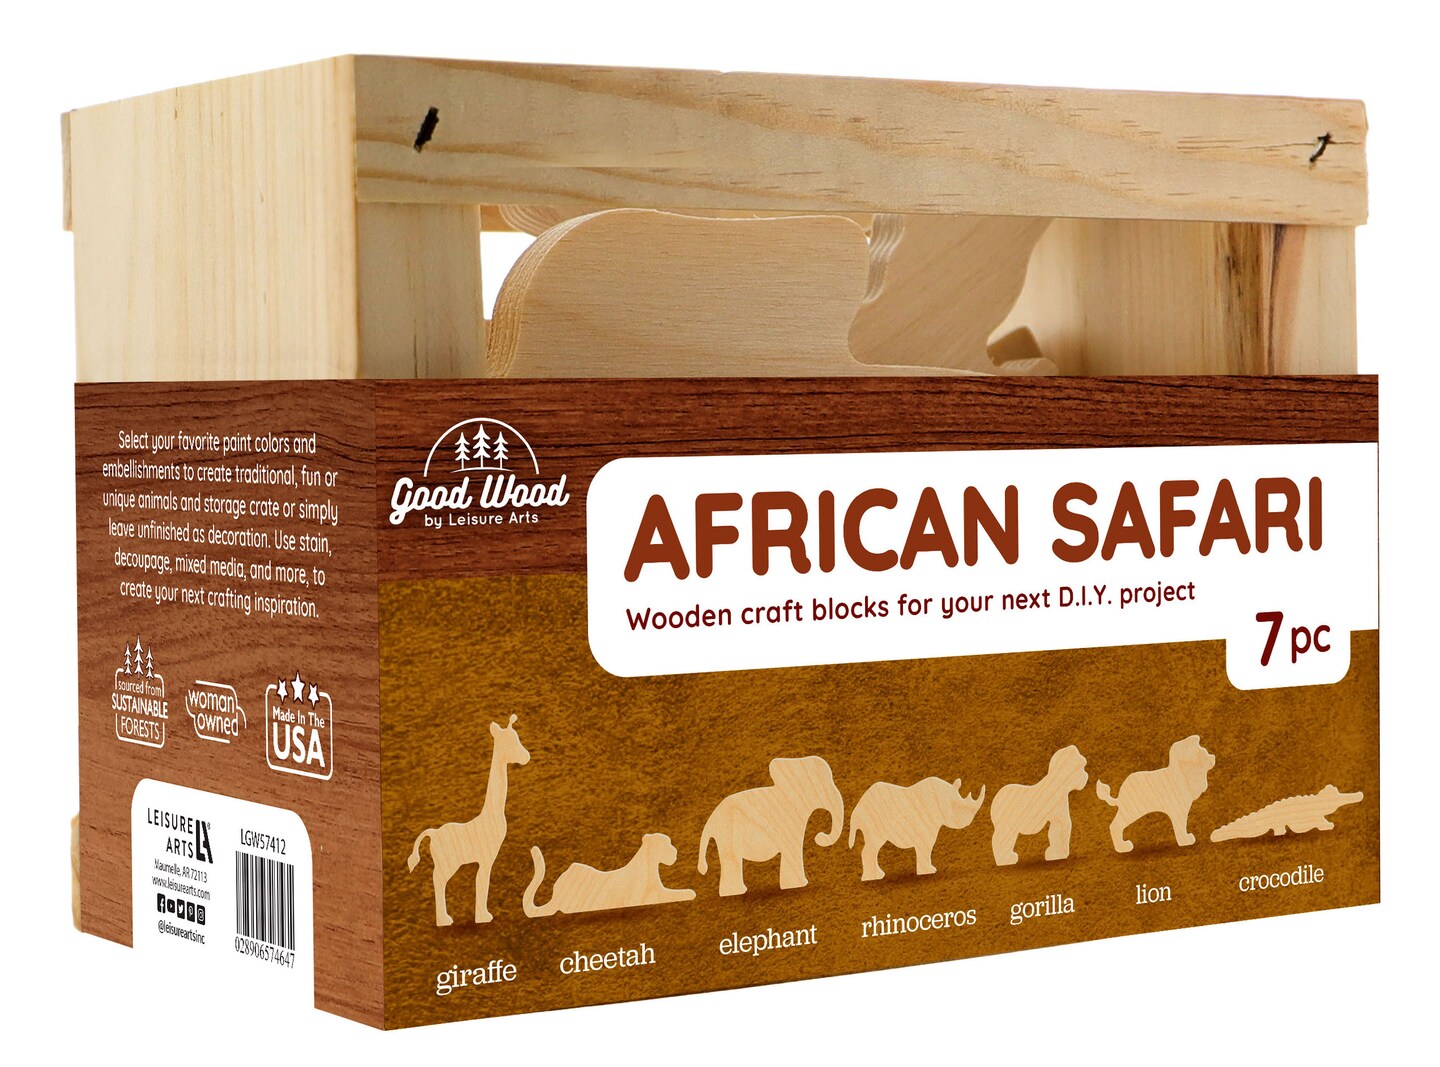 Good Wood by Leisure Arts: African Safari Crate Set - 7 Piece Animal Wood Cutouts - Small Wooden Shapes for Crafts - Wooden Craft Shapes - wooden animals to paint